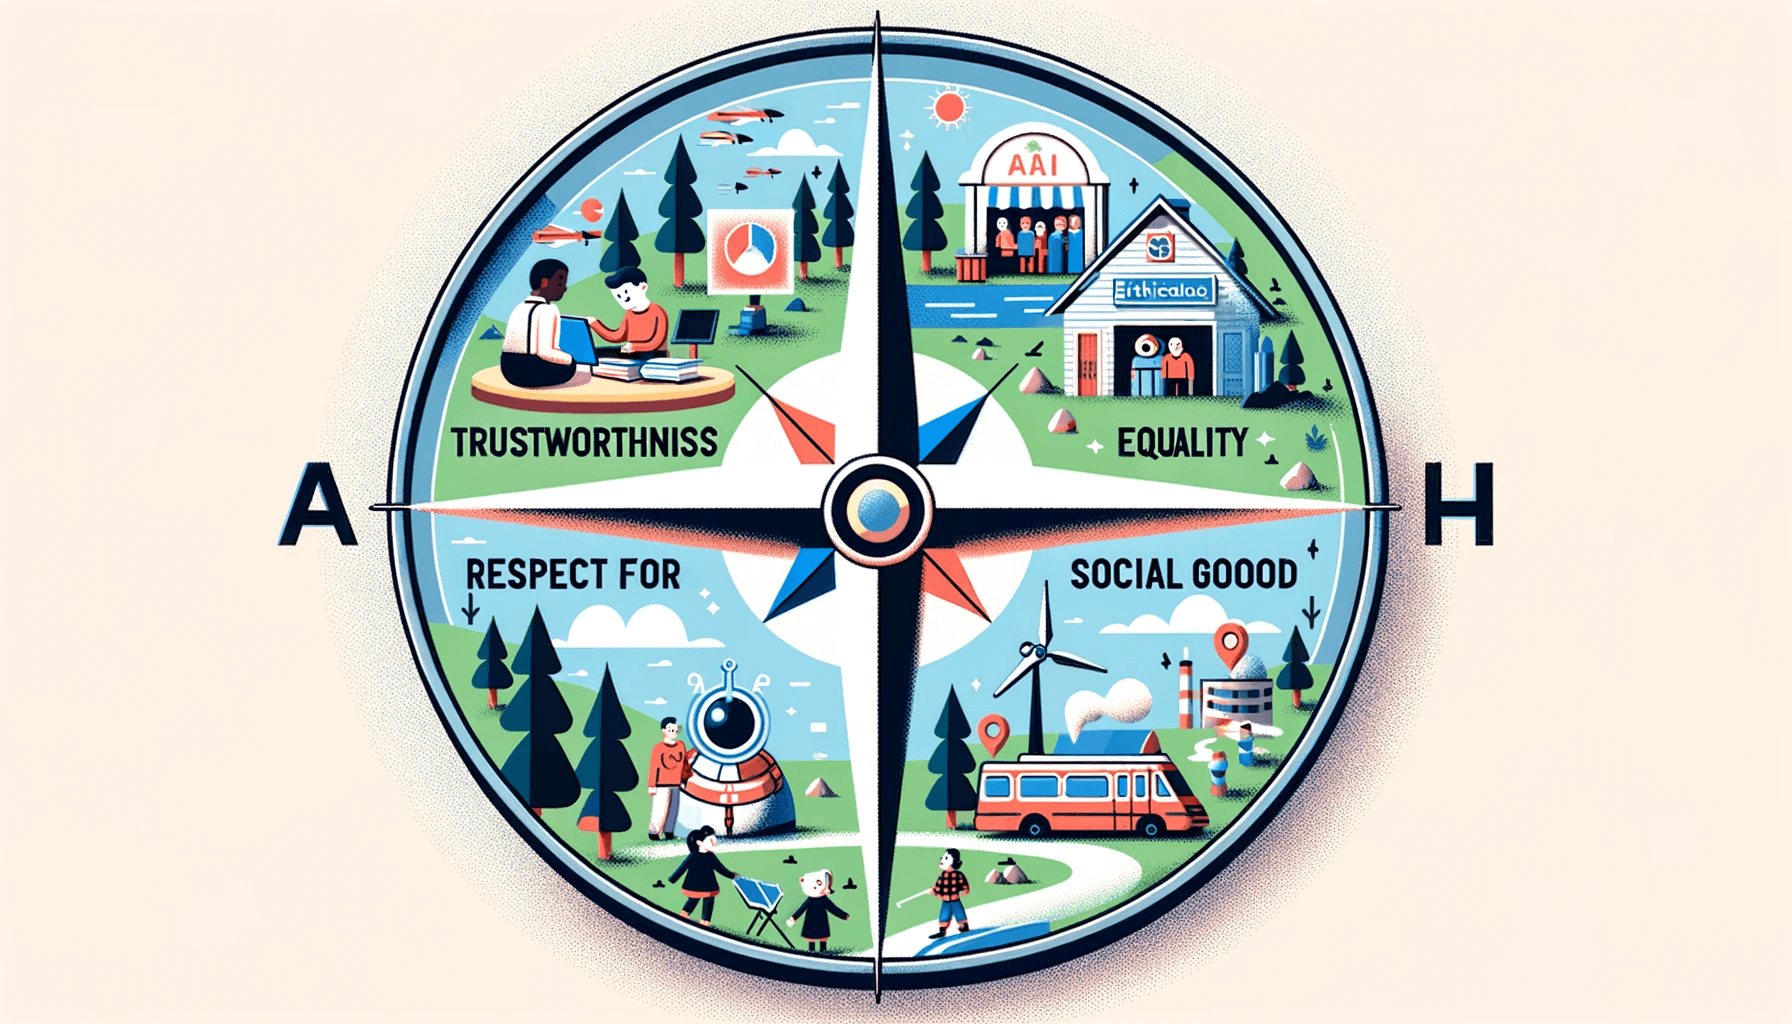 Illustration of a compass with the needle pointing towards 'Ethical AI'. The four directions represent 'Trustworthiness', 'Equity', 'Respect for Privacy', and 'Social Good'. Surrounding the compass are various scenes: a classroom with AI-driven personaliz